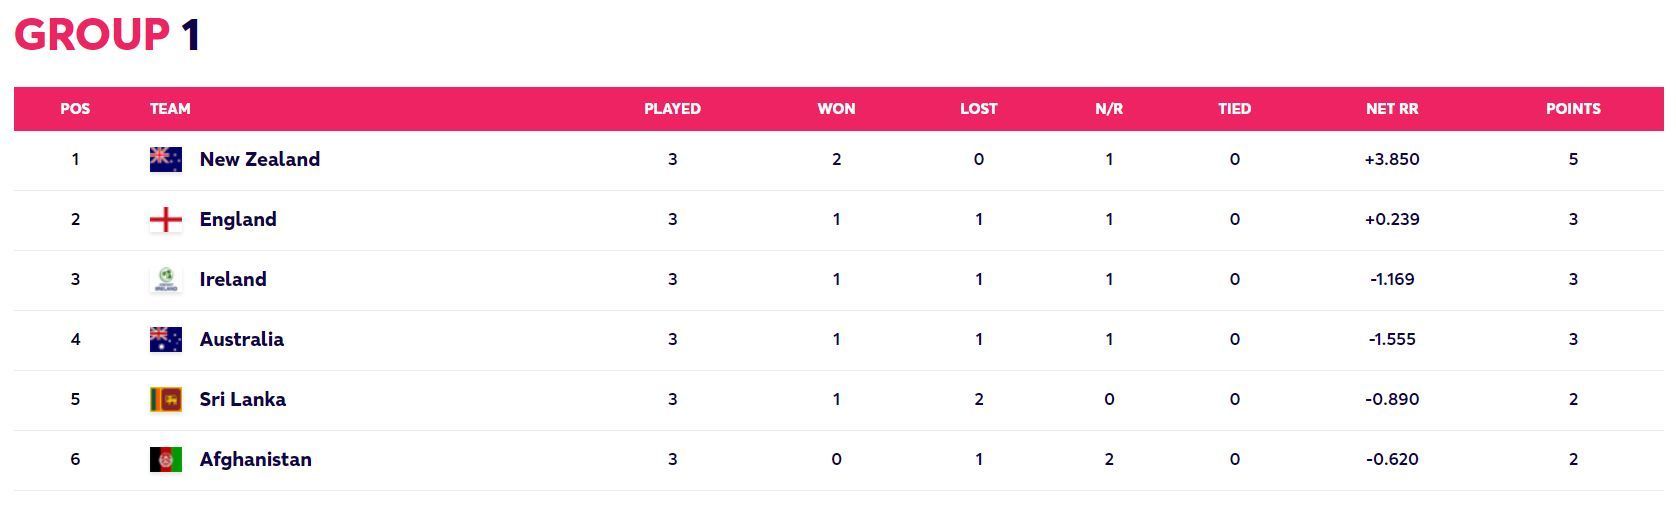 Updated Points Table after Match 27 of the T20 World Cup 2022 (Image Courtesy: www.t20worldcup.com)